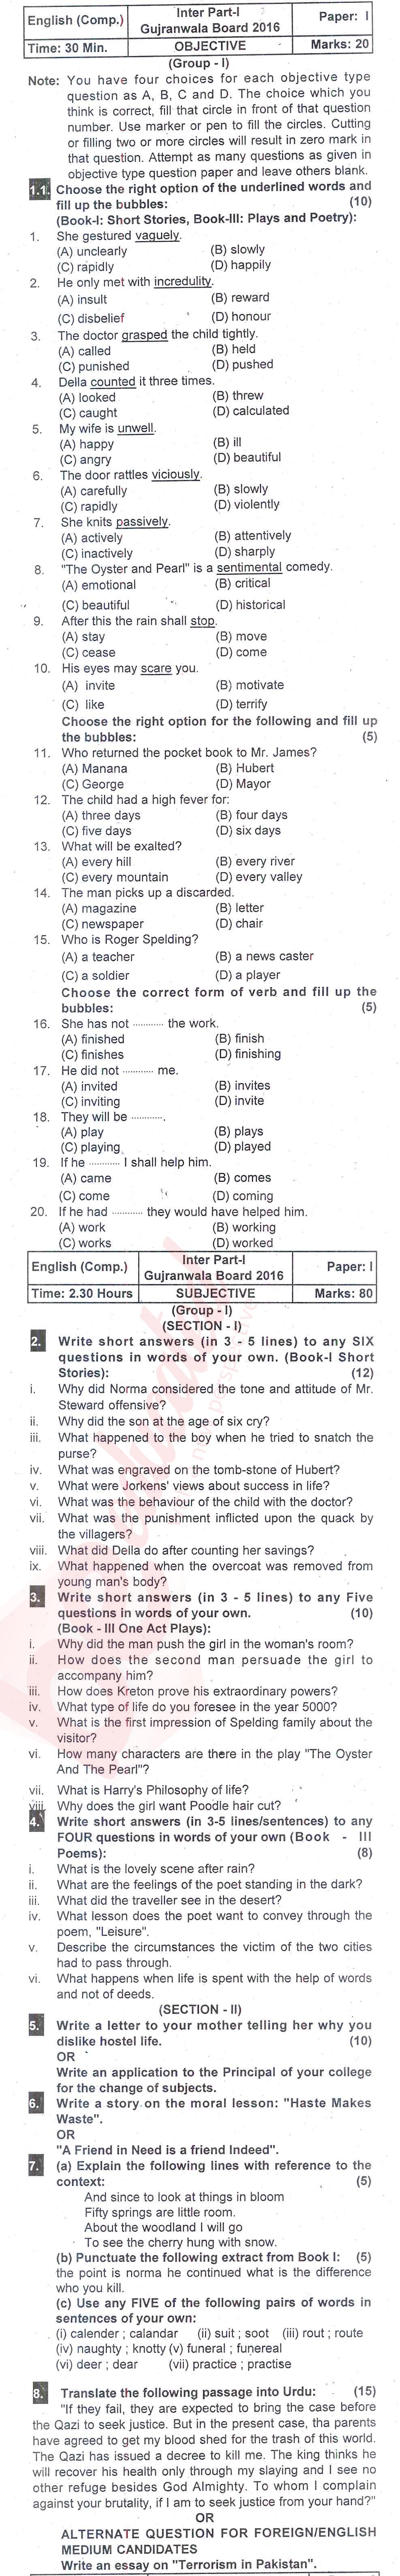 English 11th class Past Paper Group 1 BISE Gujranwala 2016